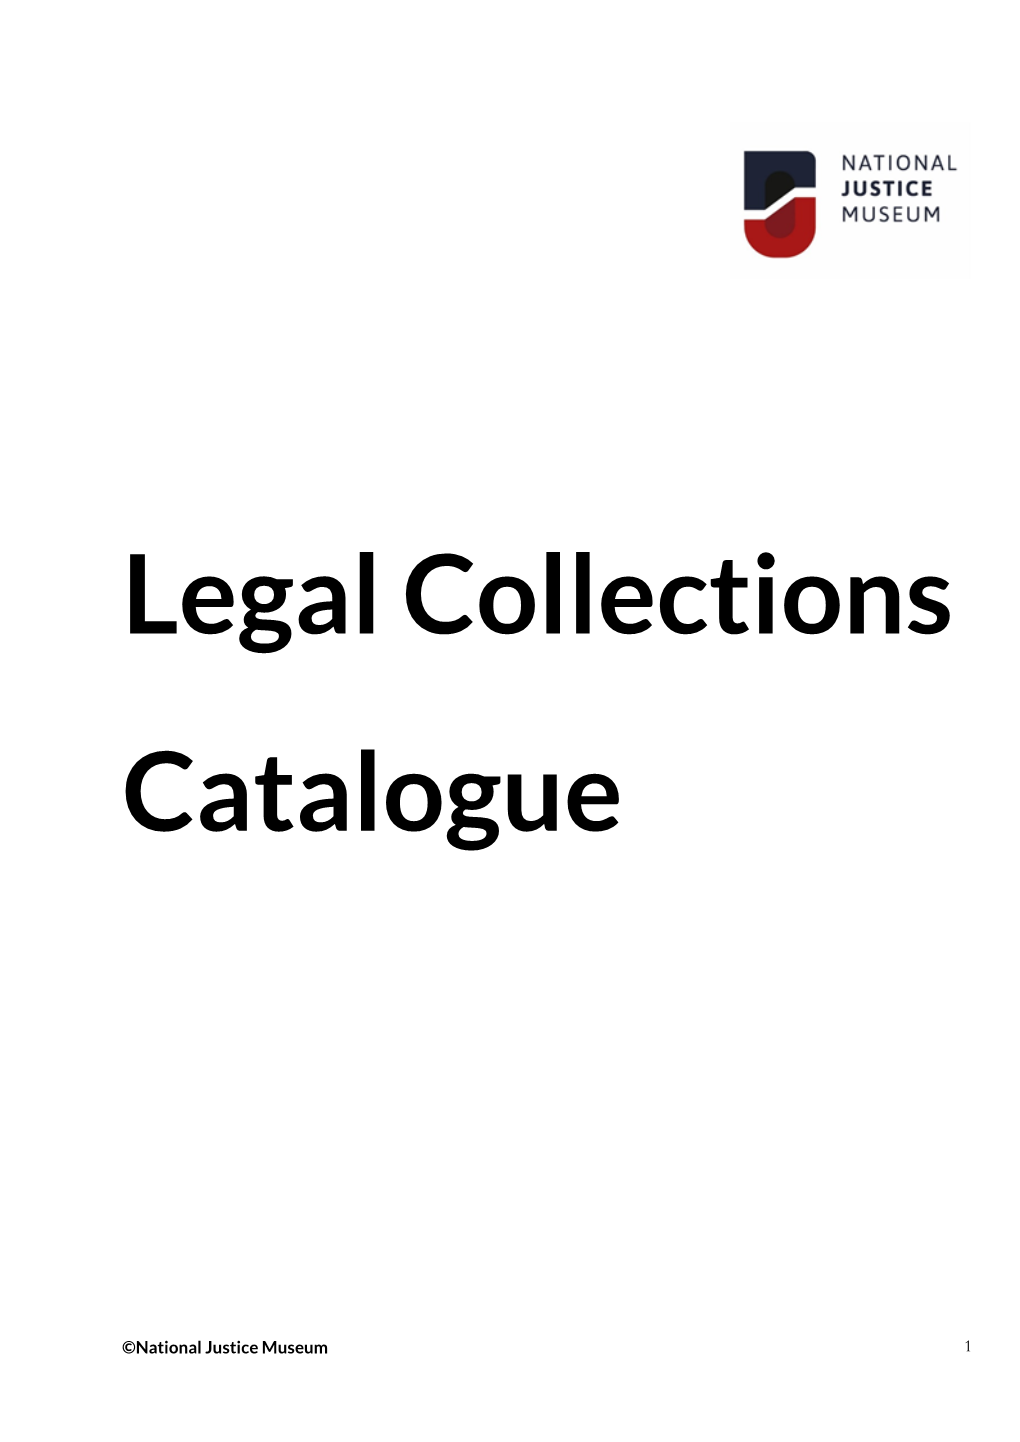 Legal Collections Catalogue